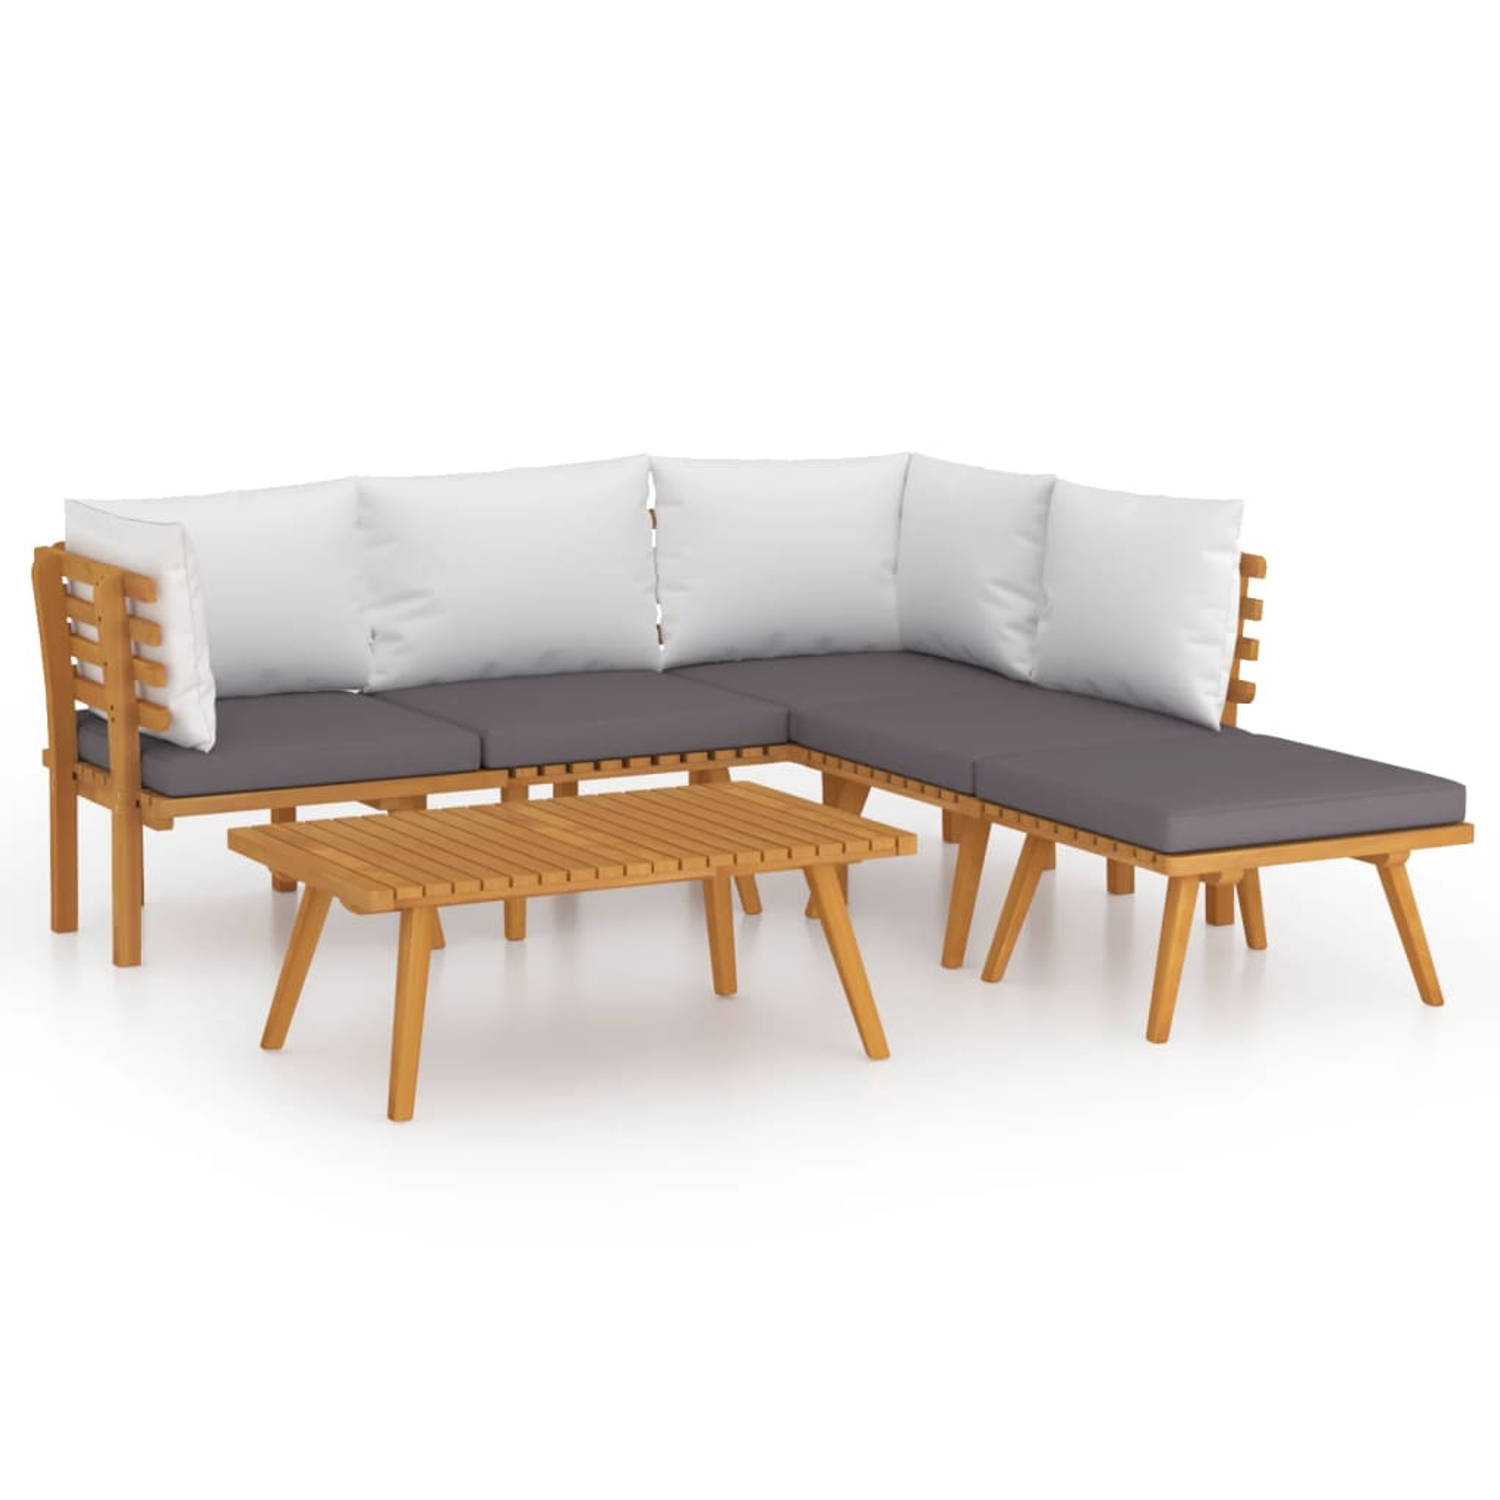 The Living Store Houten Tuinset - Lounge - Acaciahout - 100% Polyester - 90x55x35cm - Grijs/Wit